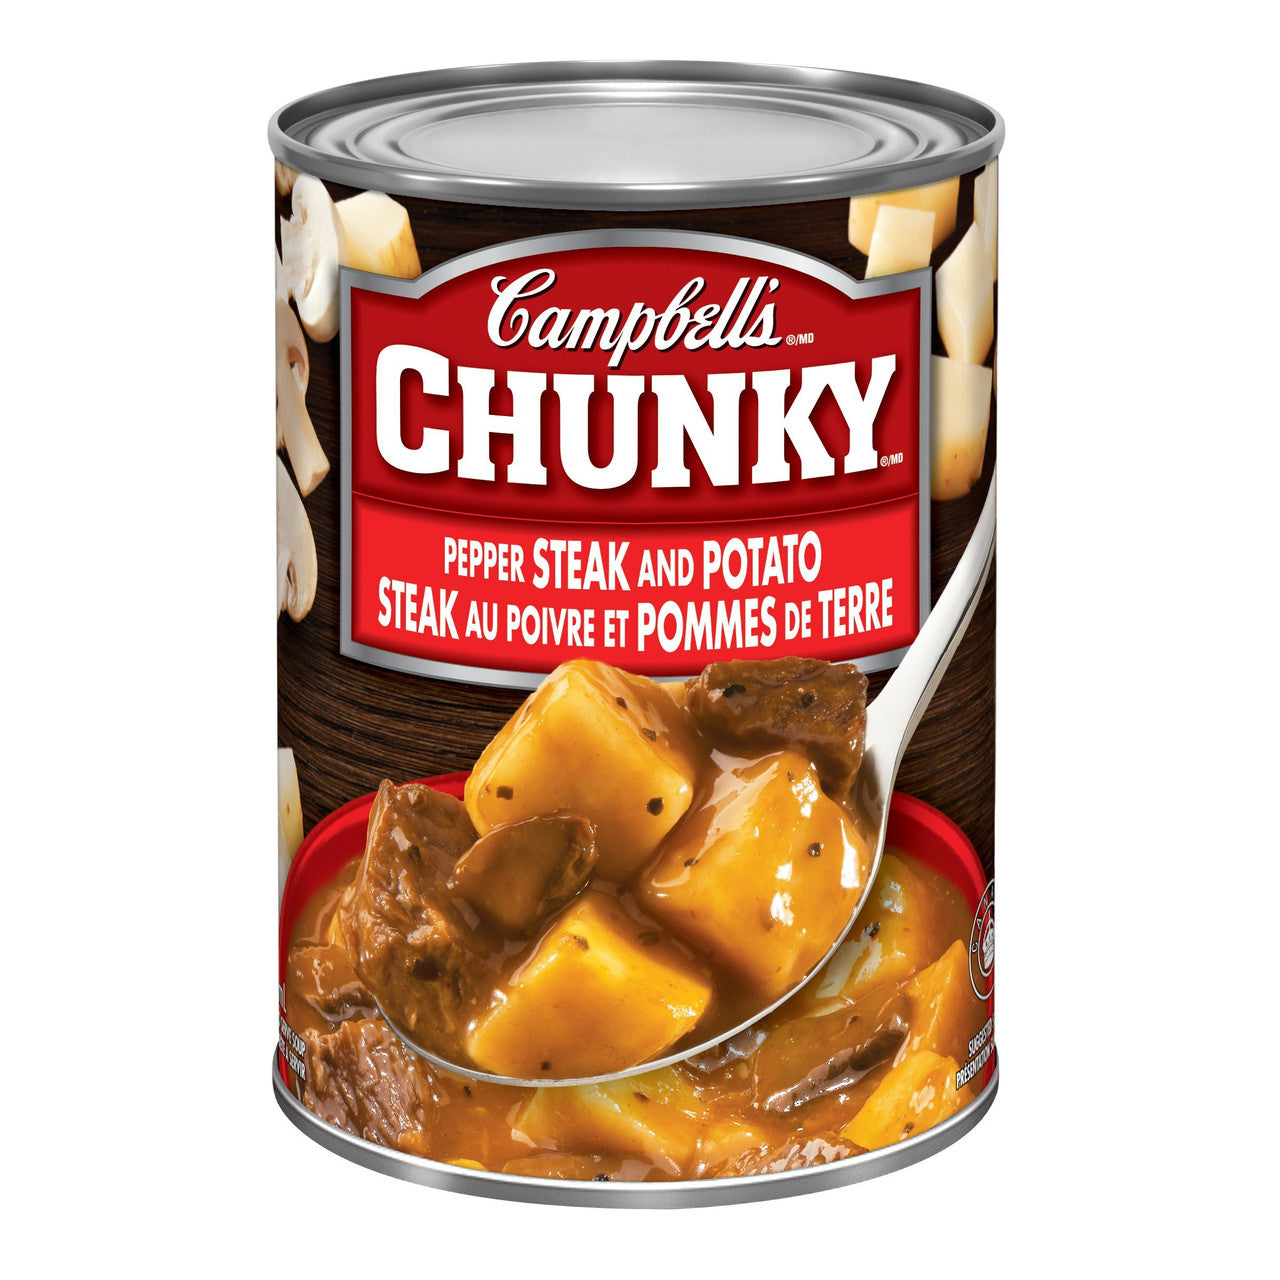 Campbell's Chunky Pepper Steak and Potato Soup, 540 mL (Imported from Canada)